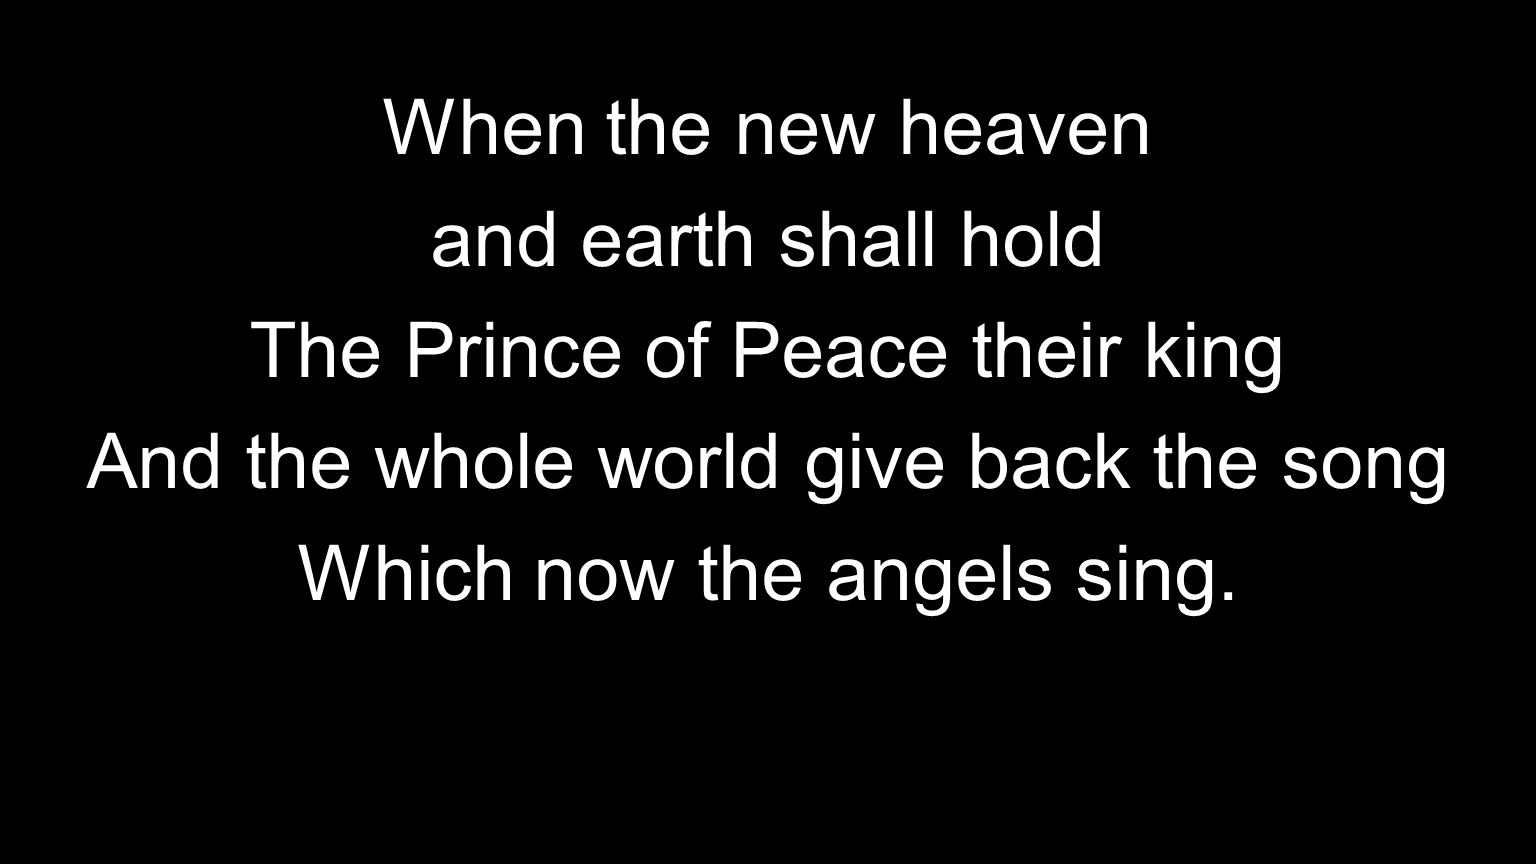 When the new heaven and earth shall hold The Prince of Peace their king And the whole world give back the song Which now the angels sing.